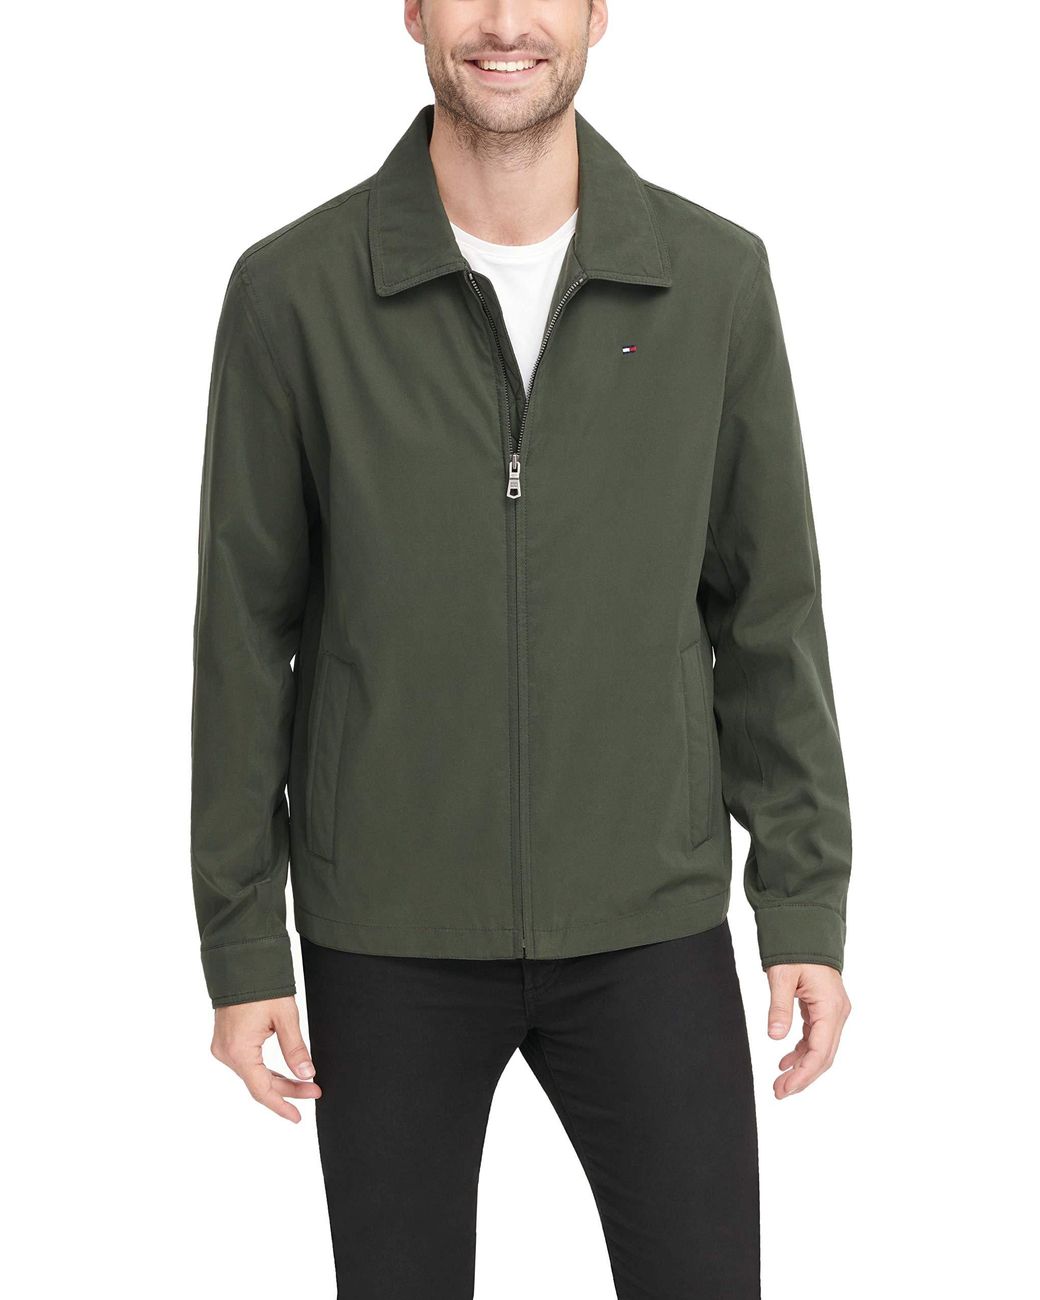 Tommy Hilfiger Lightweight Microtwill Golf Jacket in Deep Olive (Green ...